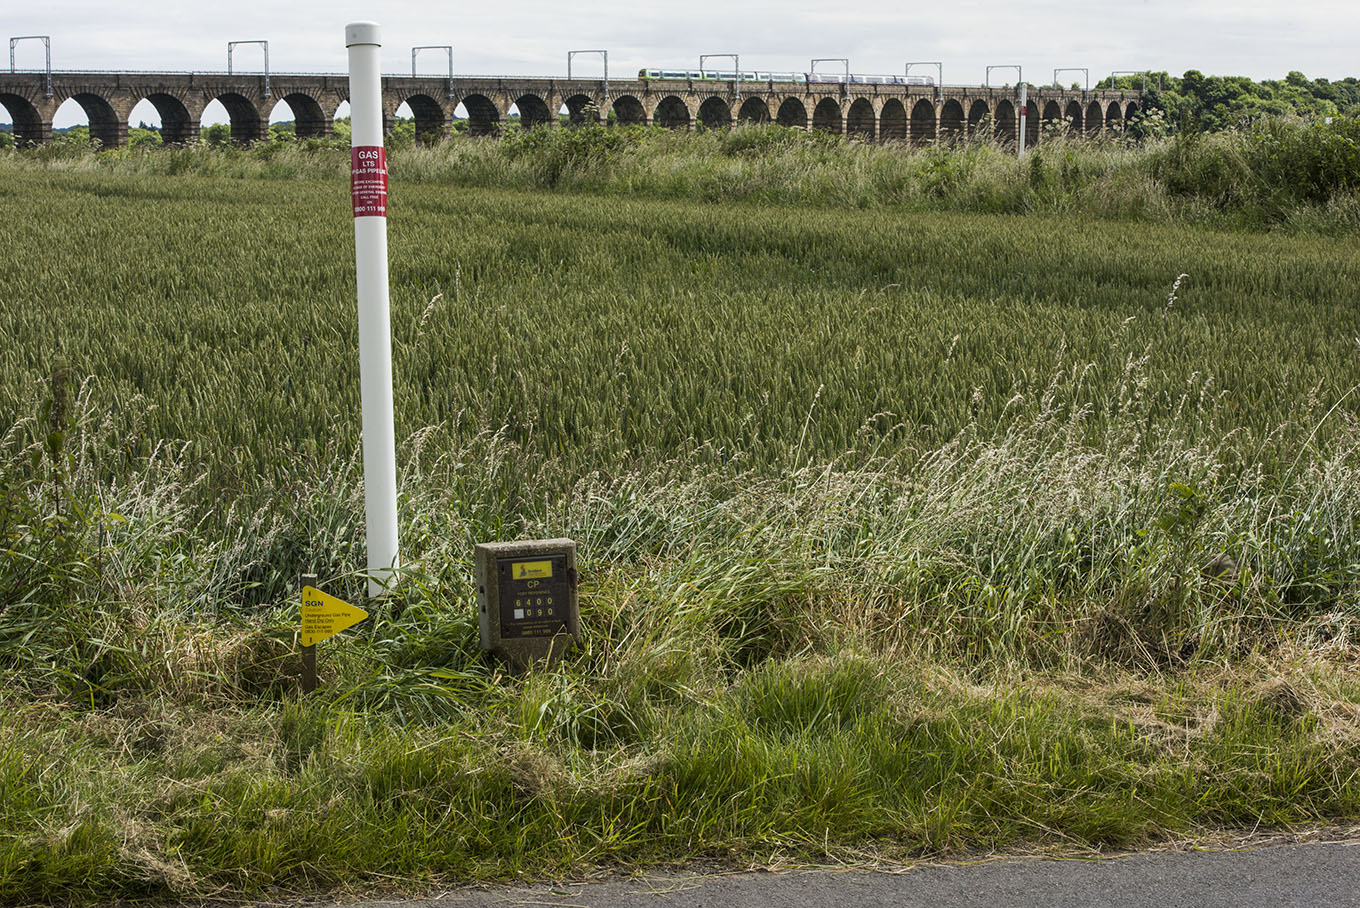 Pipeline markers like these indicate the location of high-pressure gas pipelines